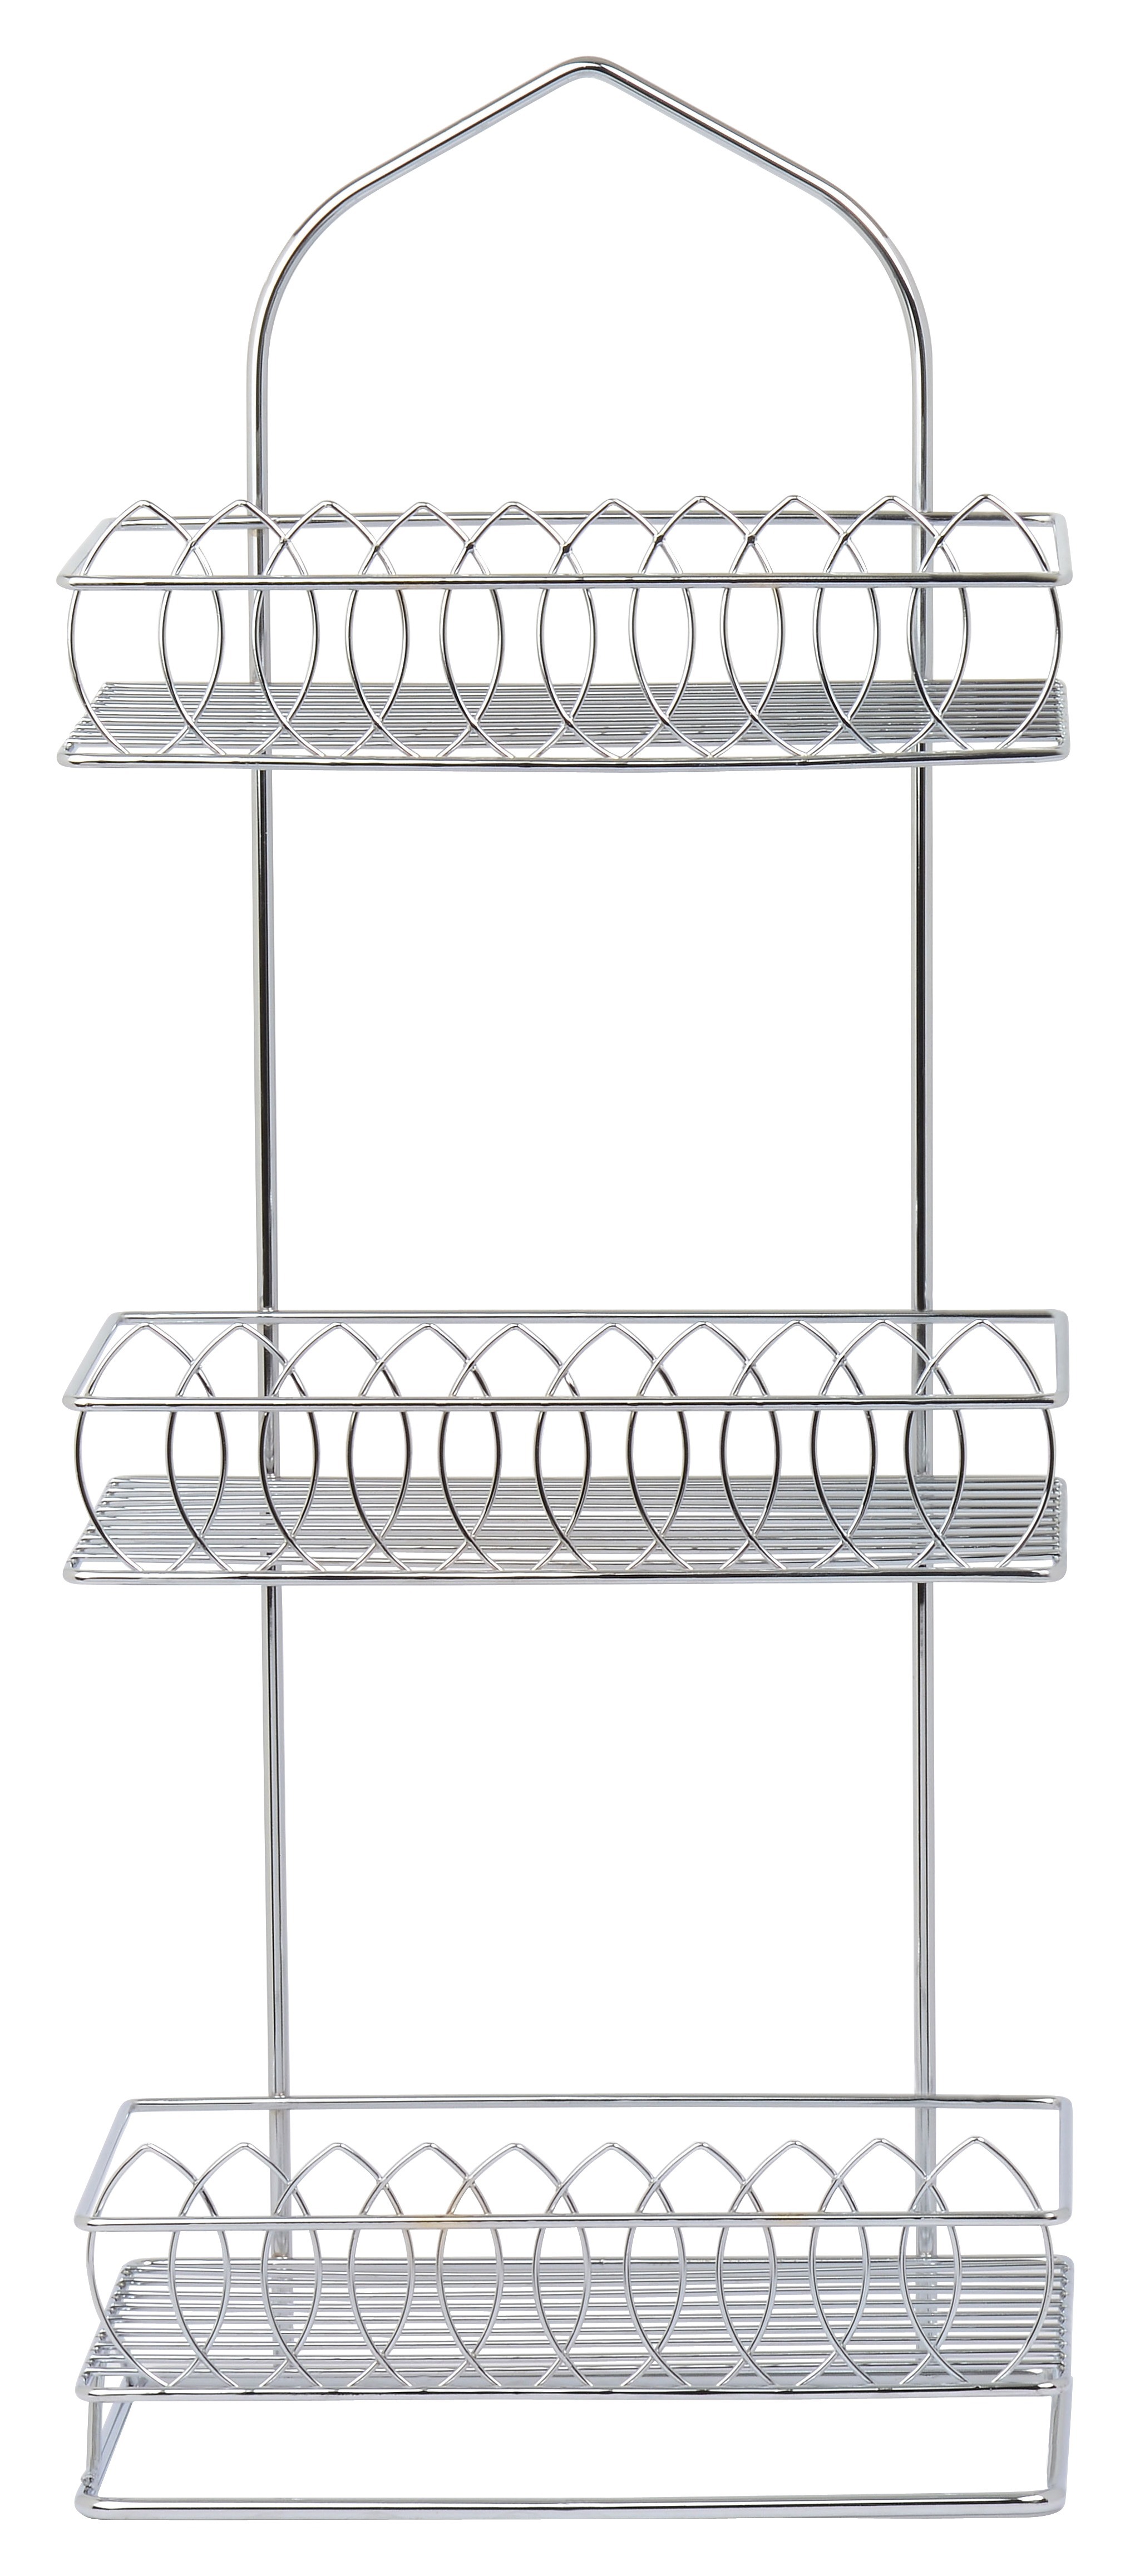 3 Tier Stand - High Quality Stainless Steel with Shiny Chrome Polish